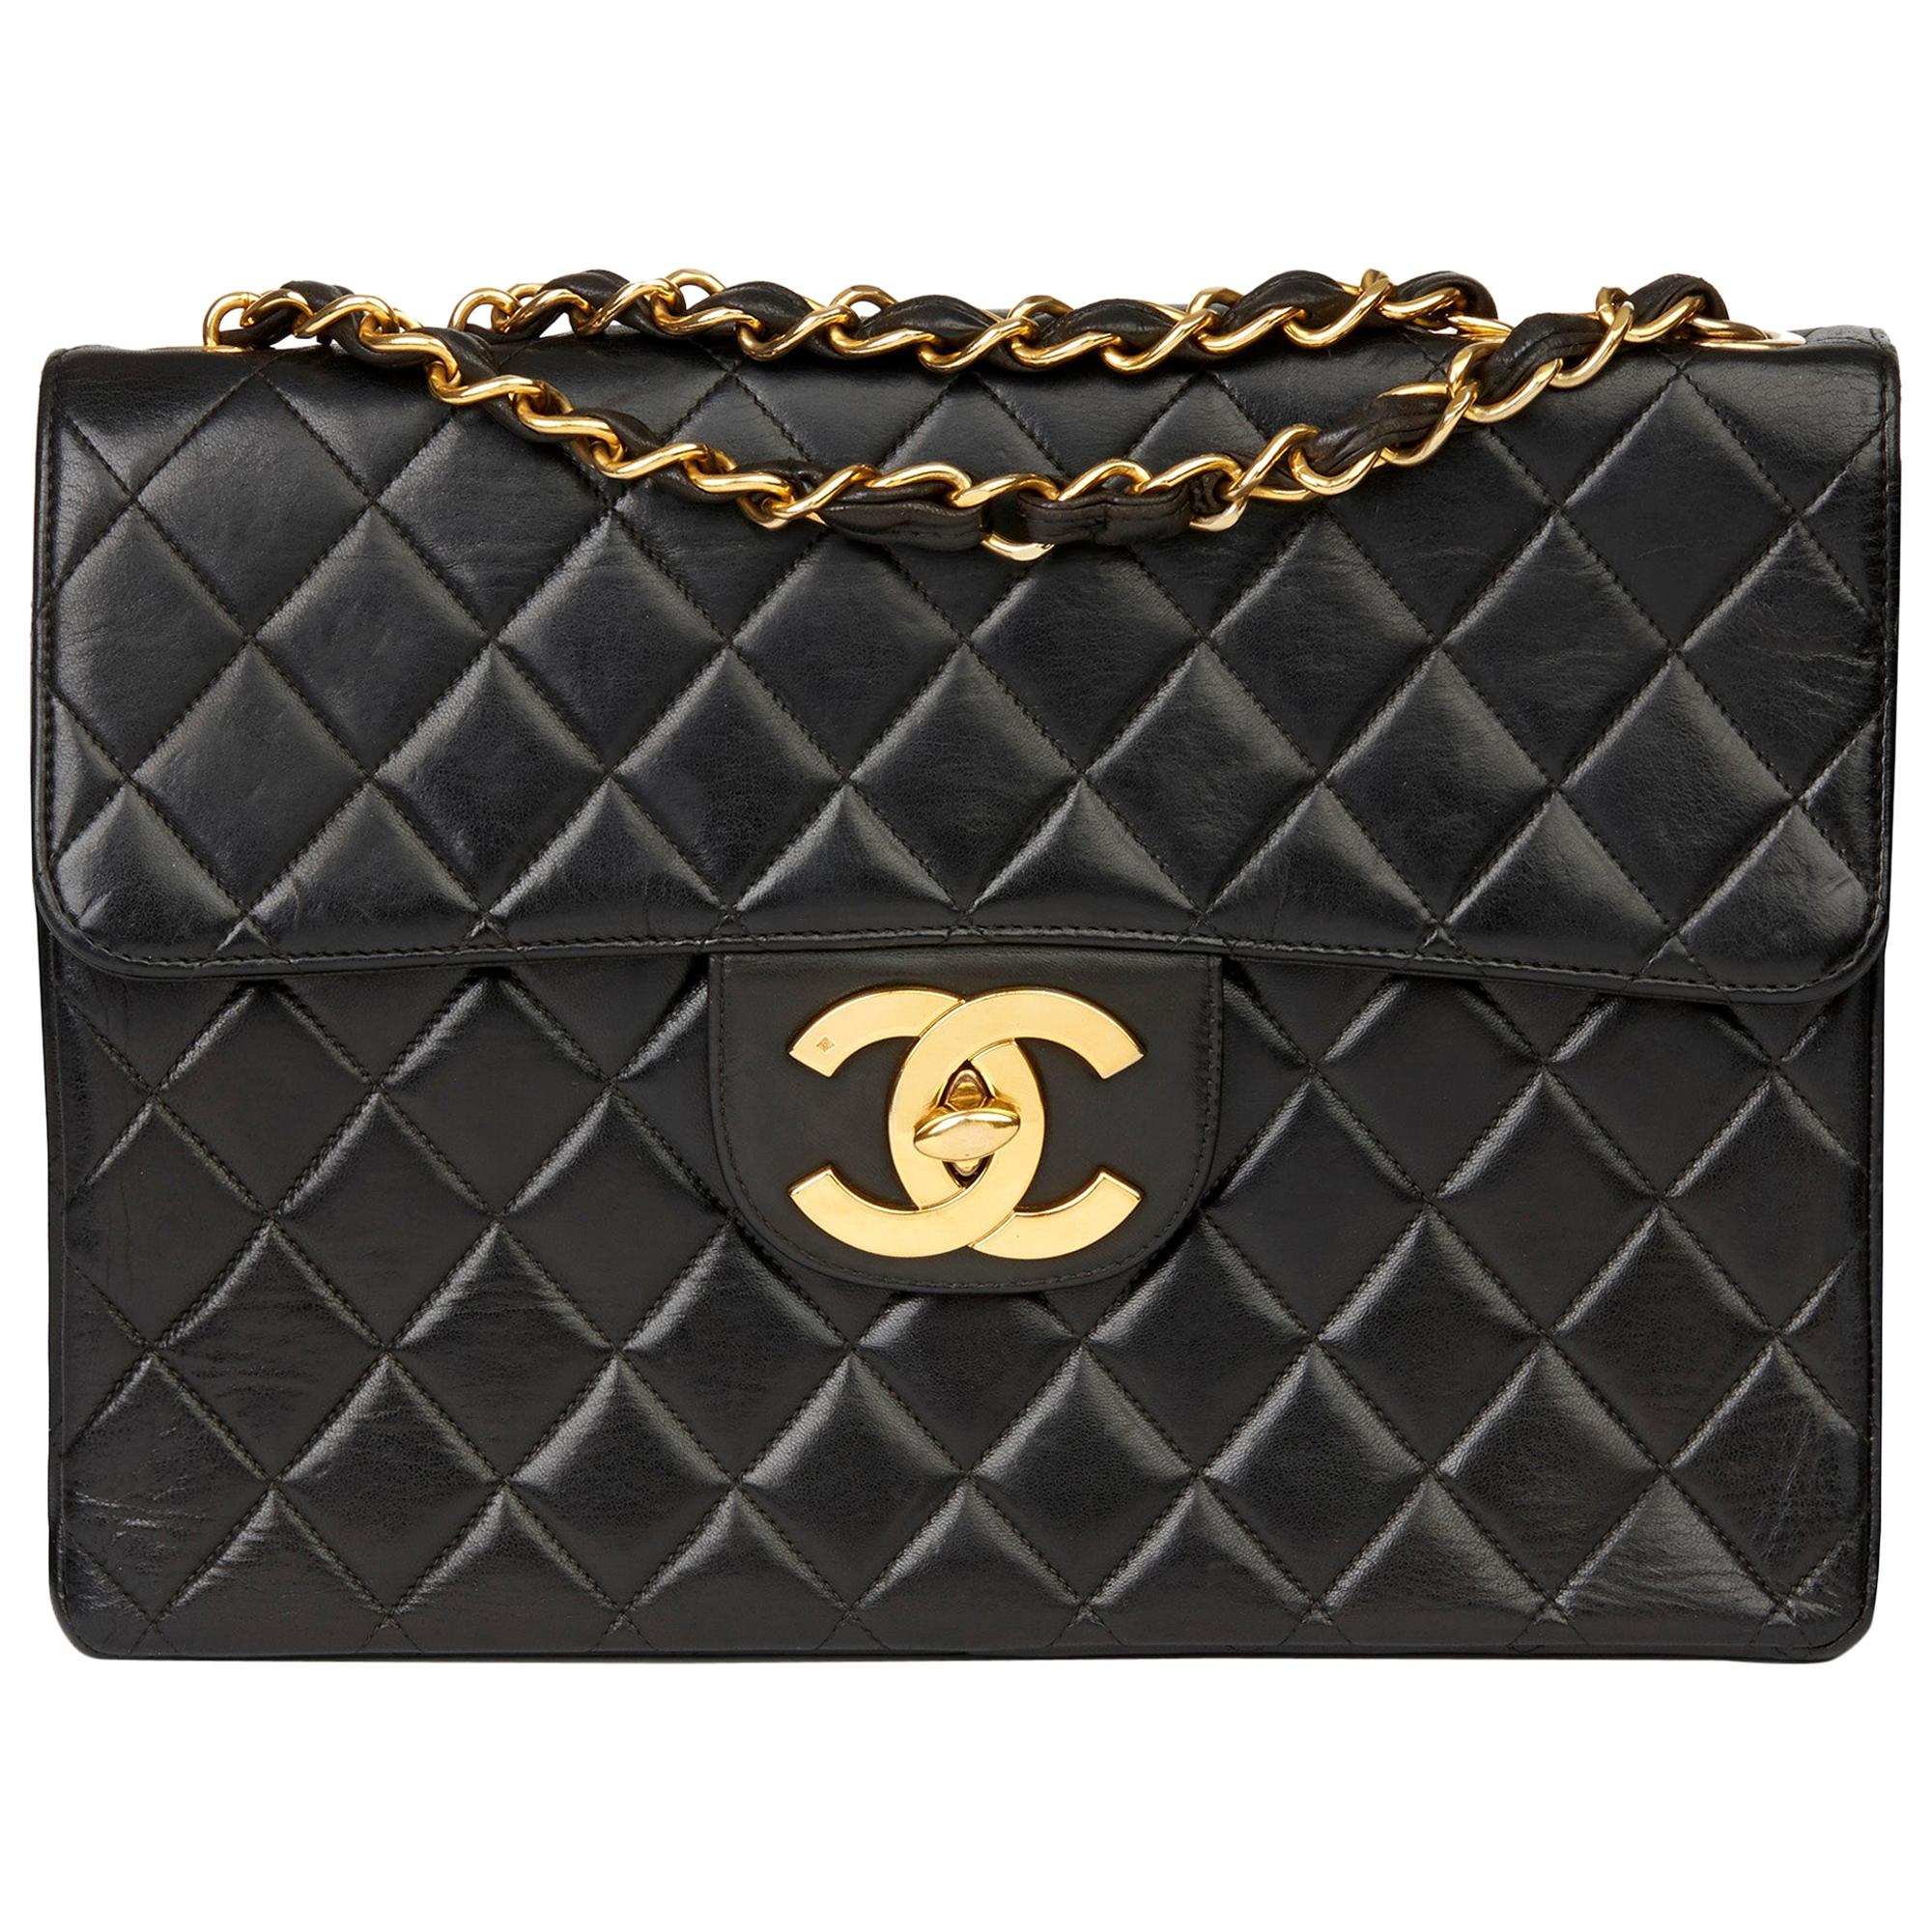 1996 Chanel Black Quilted Lambskin Vintage Jumbo XL Flap Bag